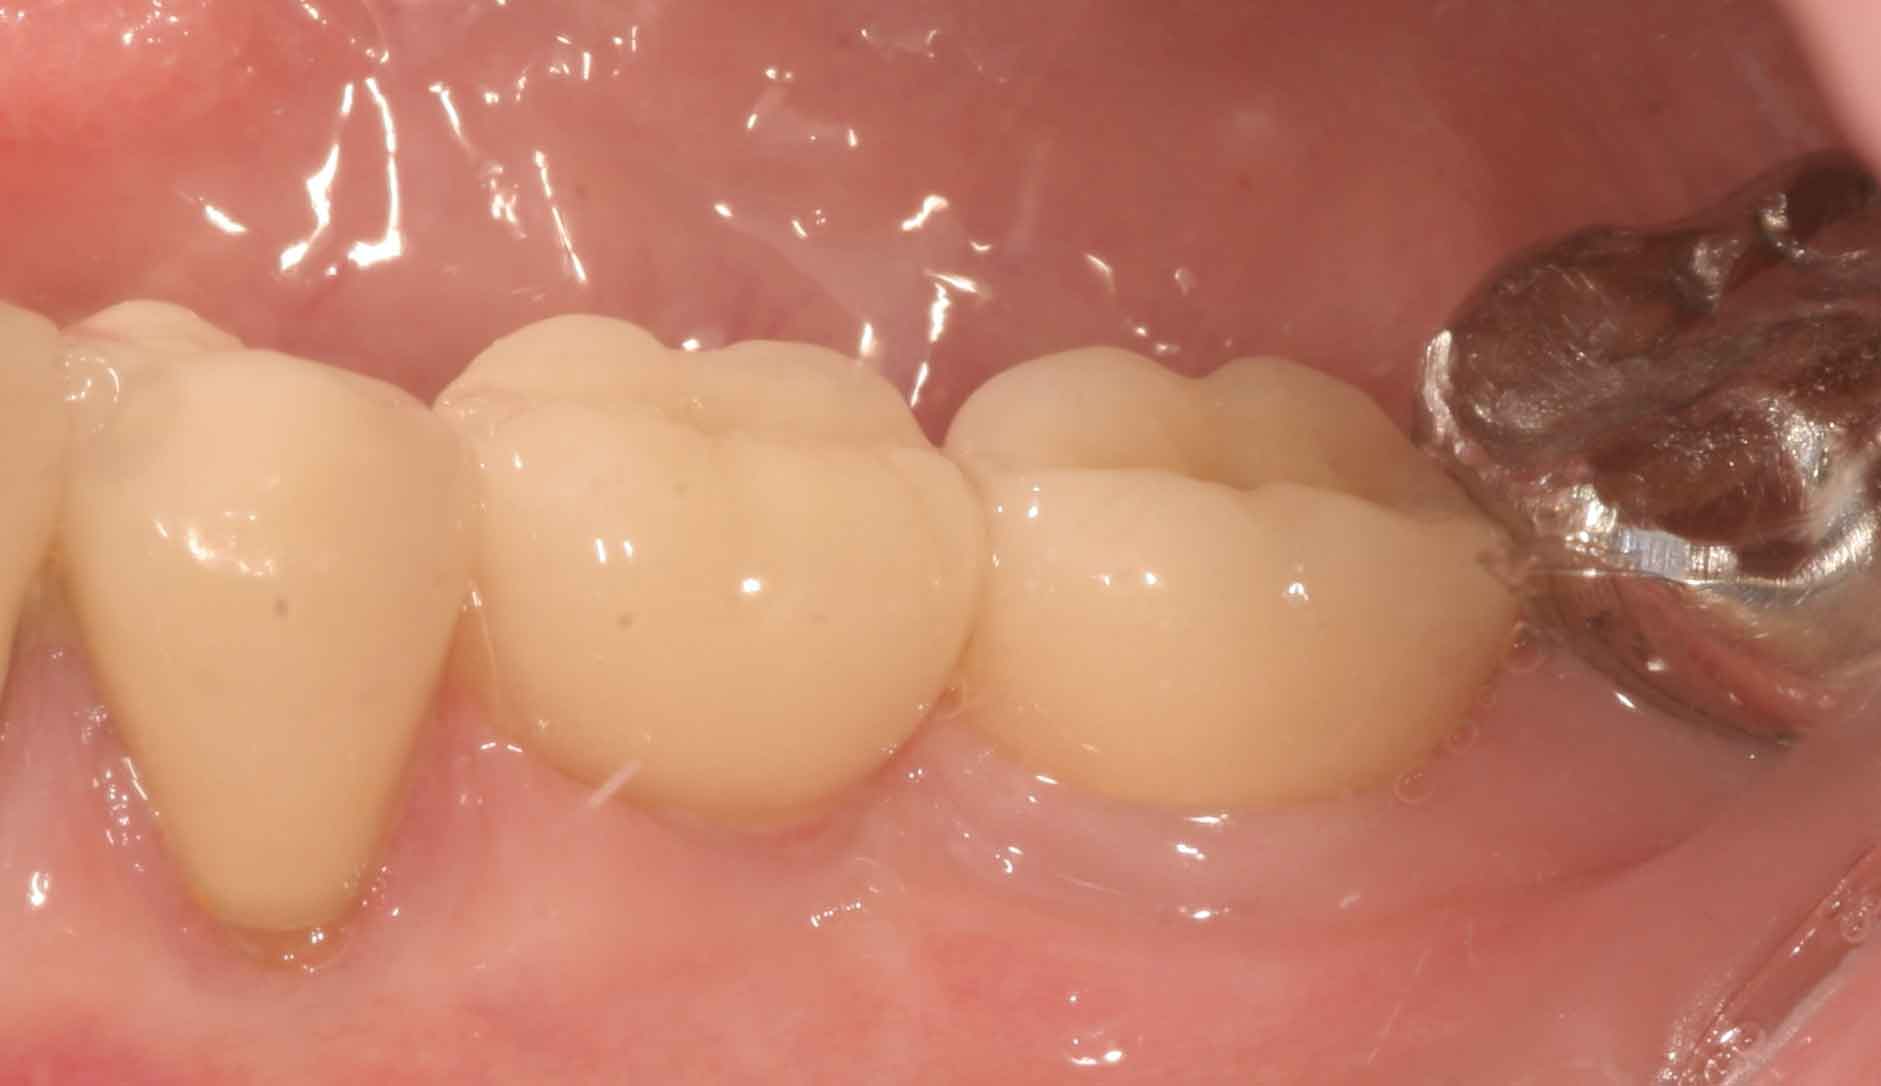 Pittsburgh periodontist picture after implants